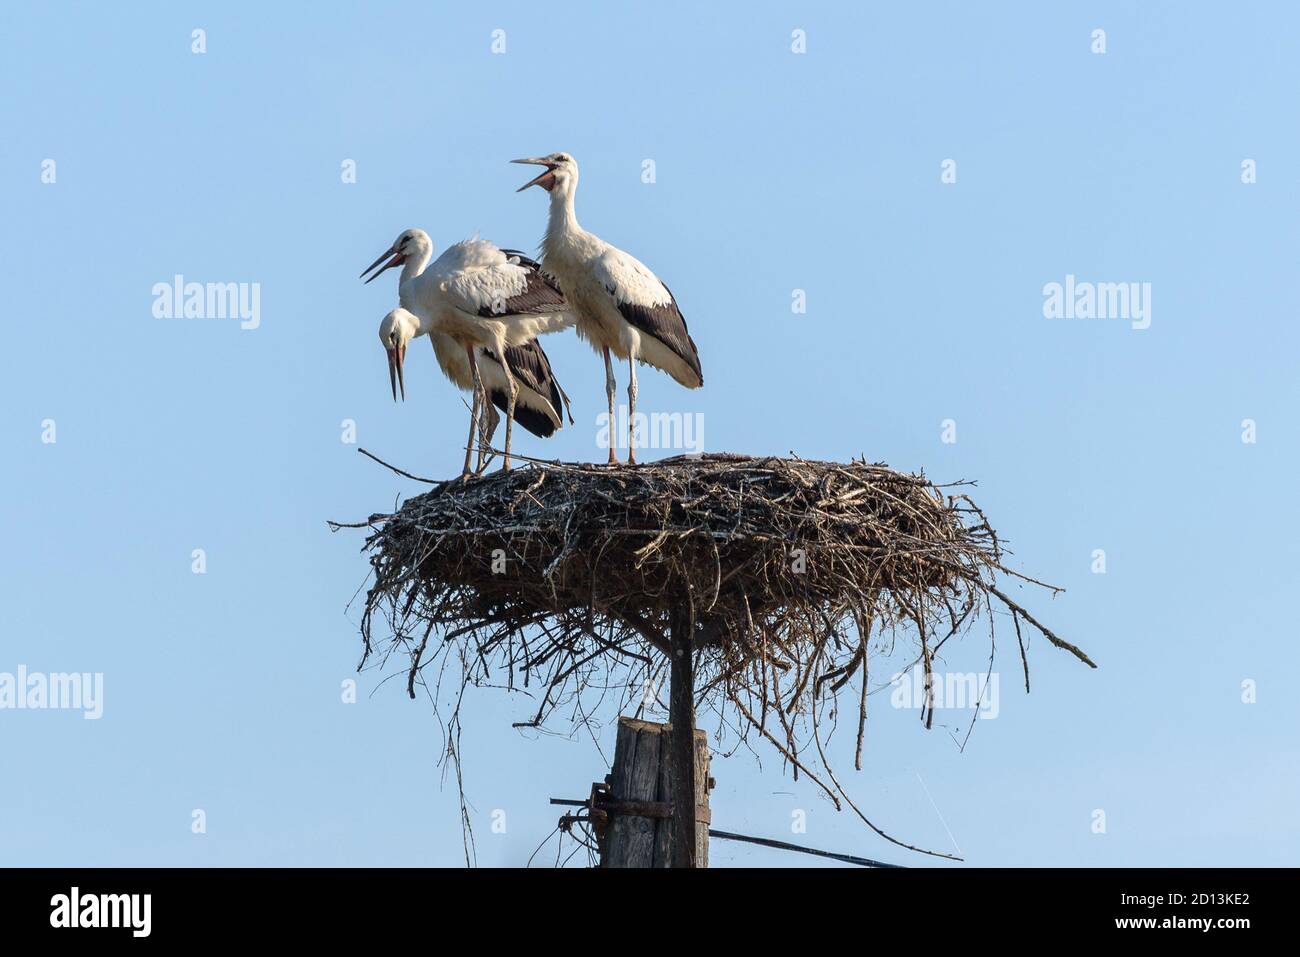 Three juvenile white storks in their nest atop a pole in Hortobagy National Park, Hungary Stock Photo